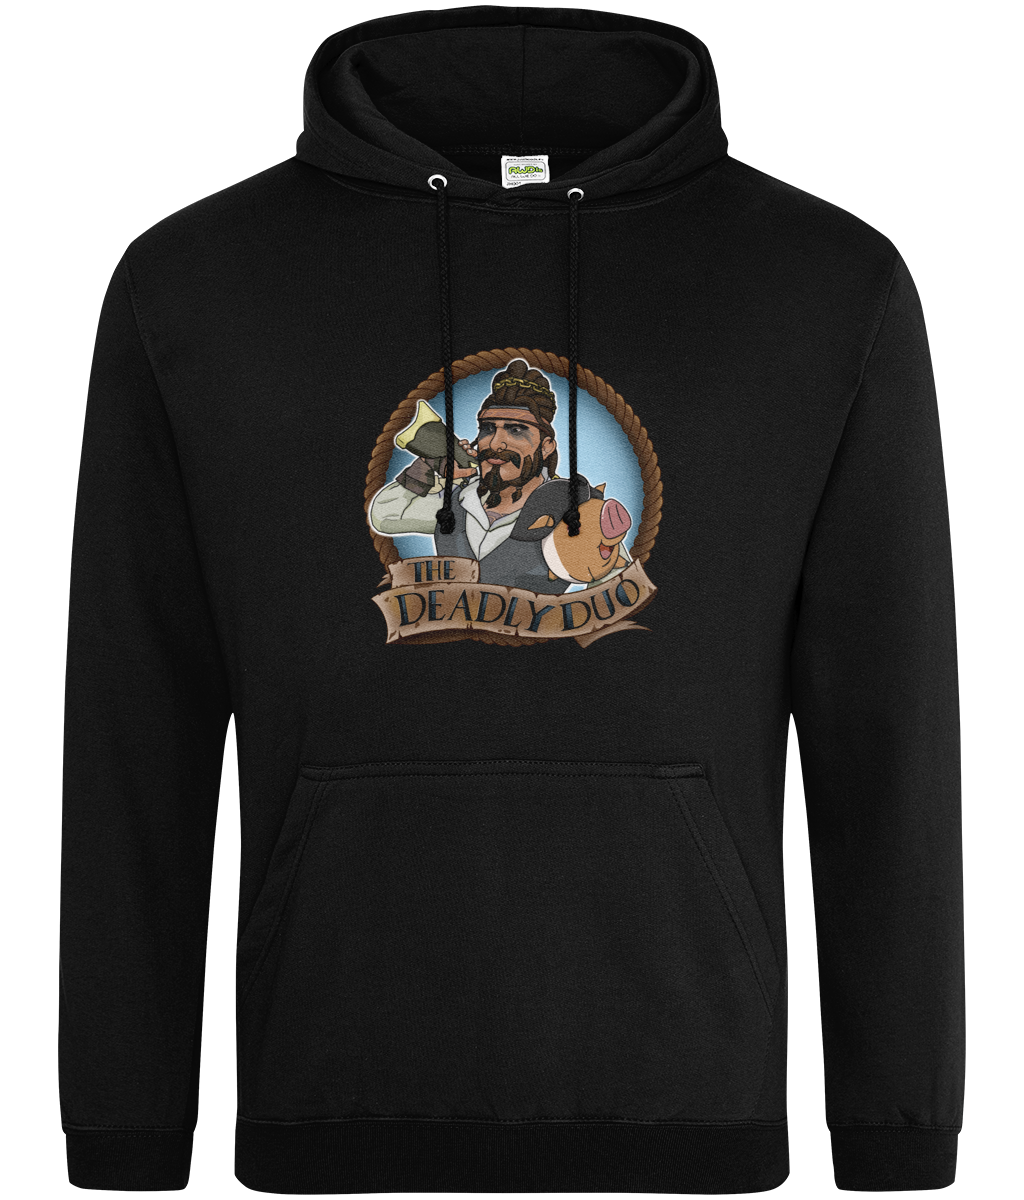 Rob Raven 'The Deadly Duo' College Hoodie